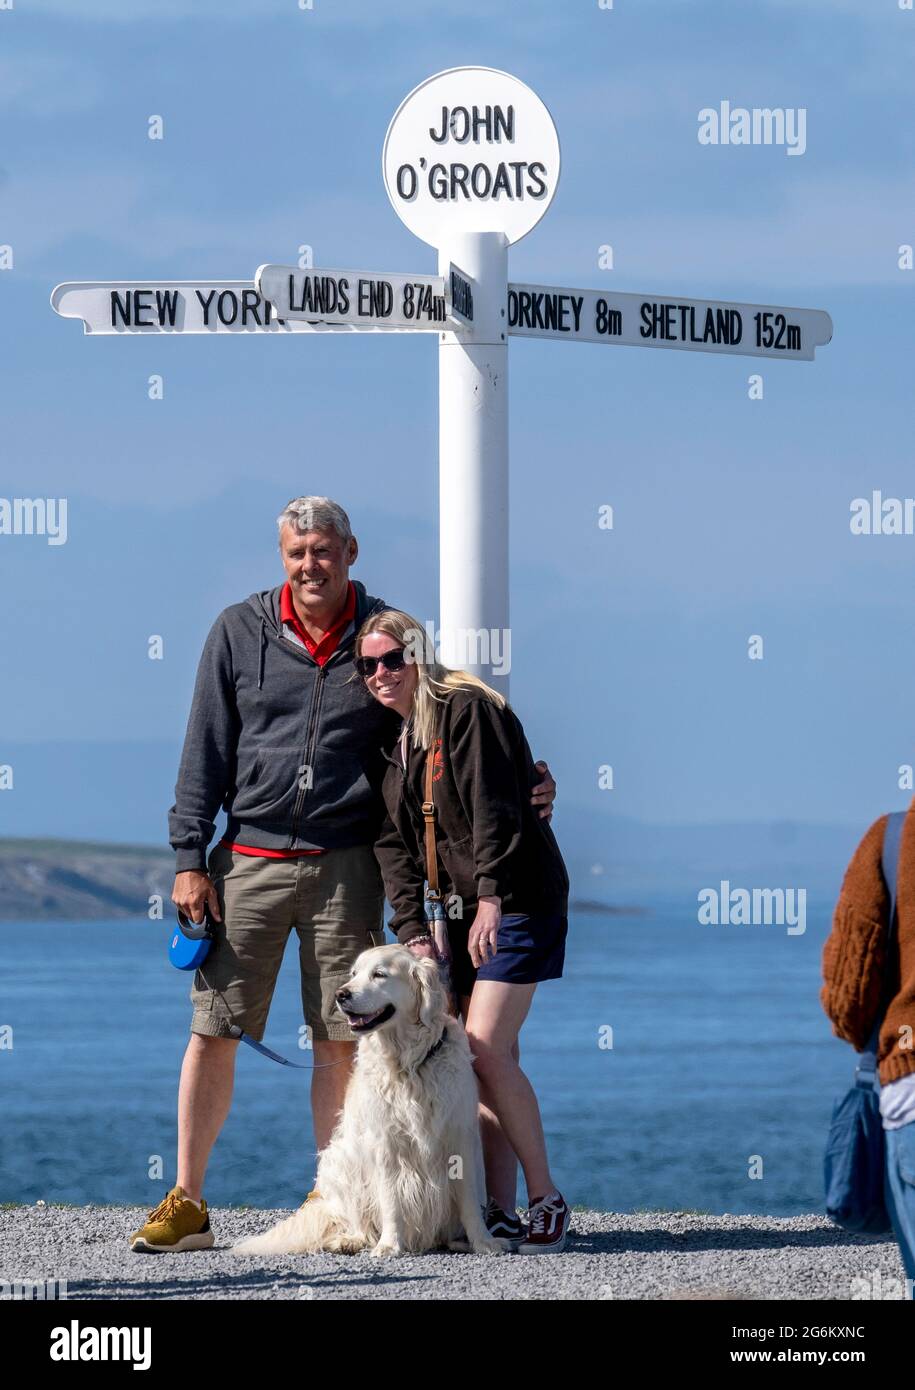 Tourist sign post at John'O Groats,  Caithness Scotland,  the most northerly inhabited place on the British mainland. Stock Photo